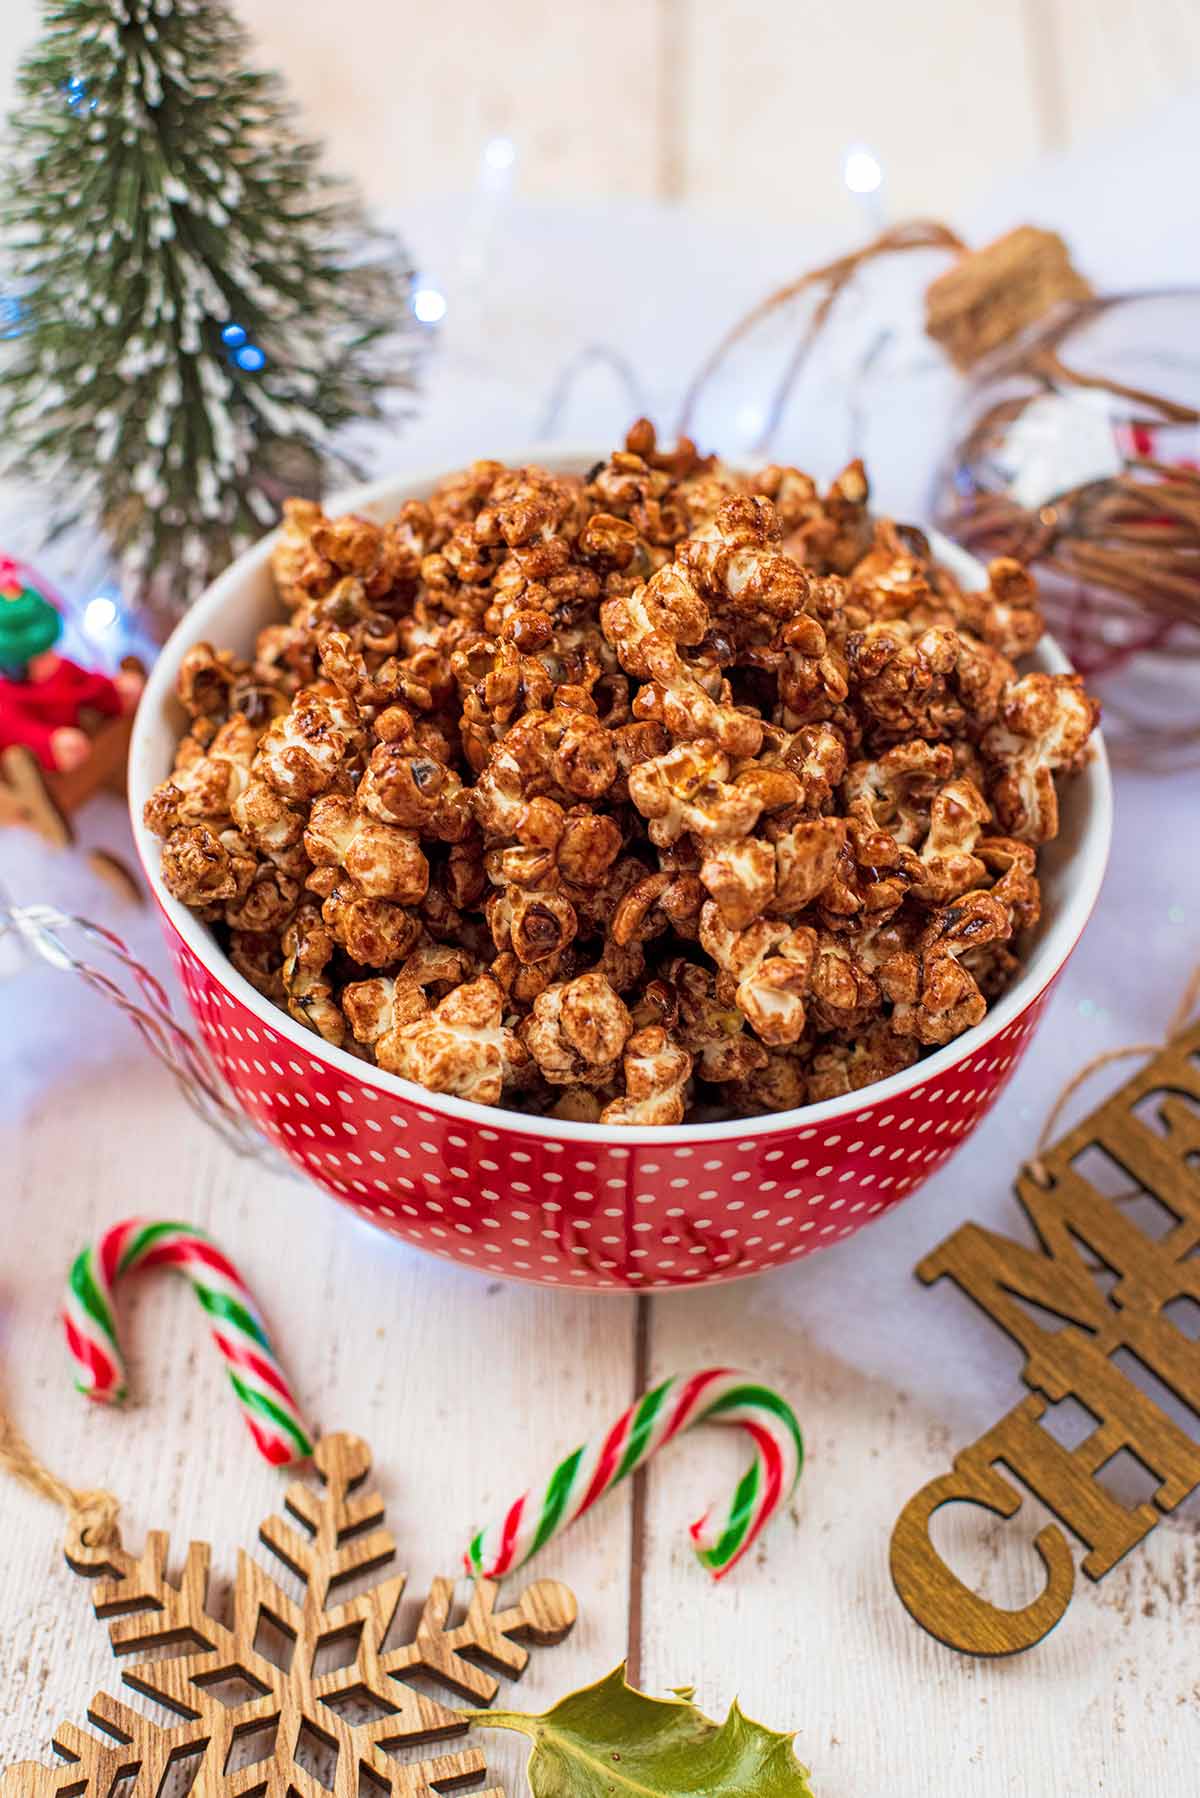 Popcorn in a red bowl next to Christmas decorations.